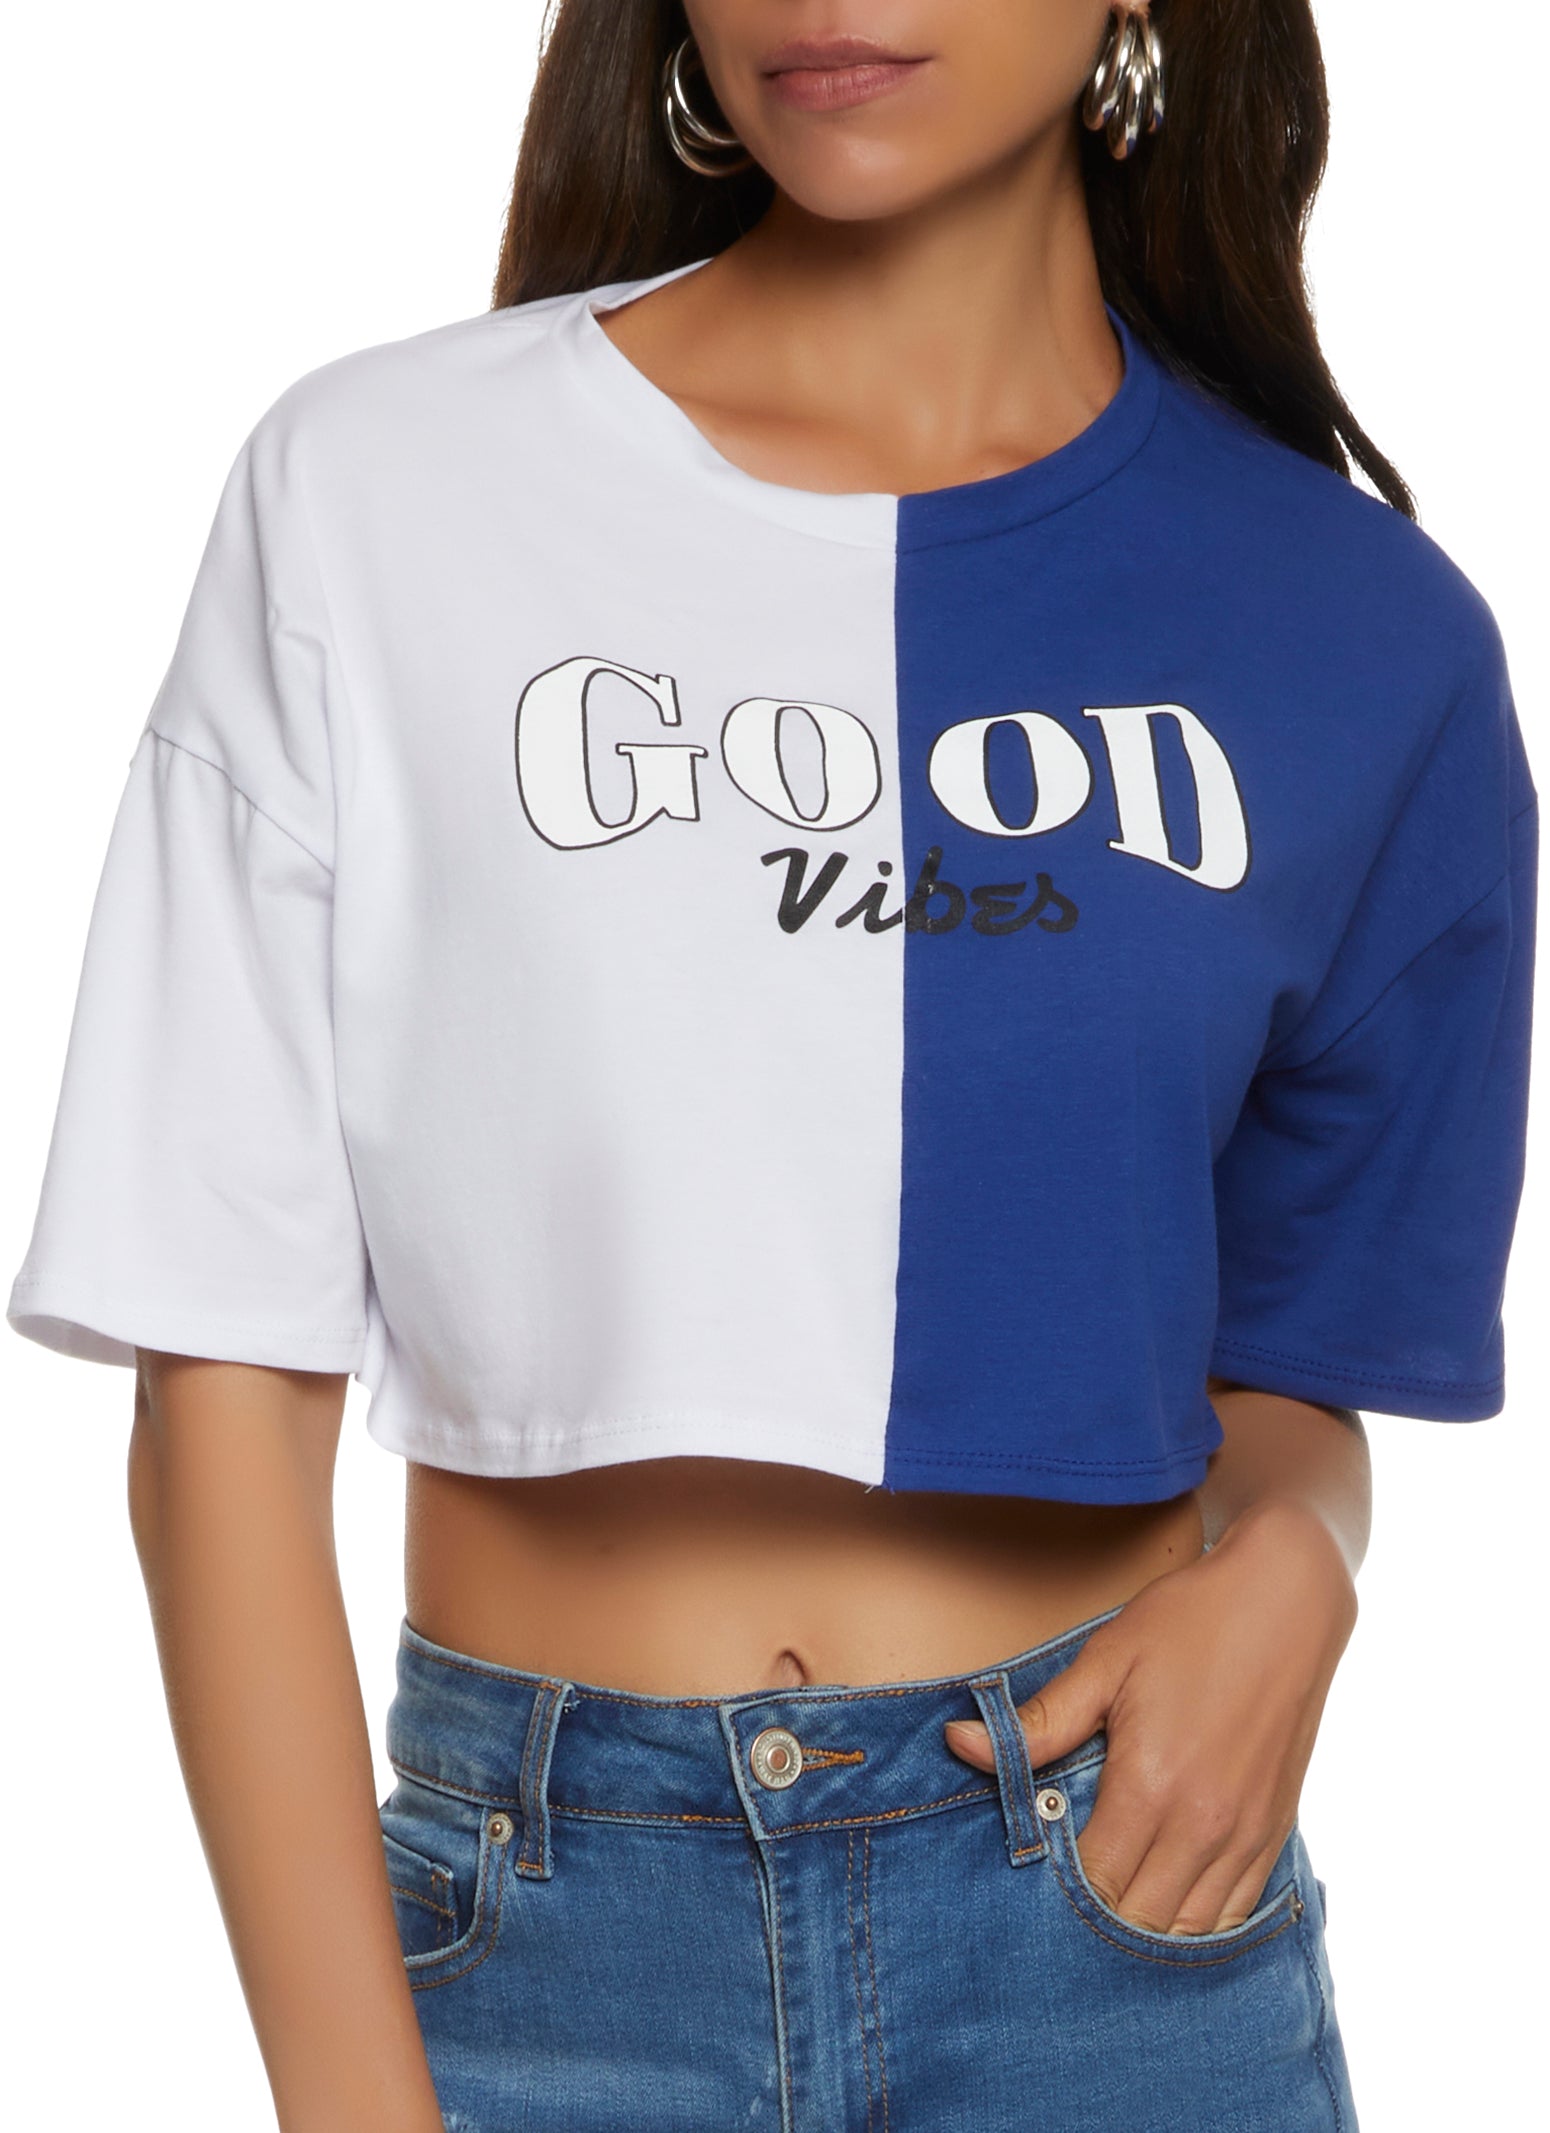 Two Tone Good Vibes Graphic Cropped Tee - Blue